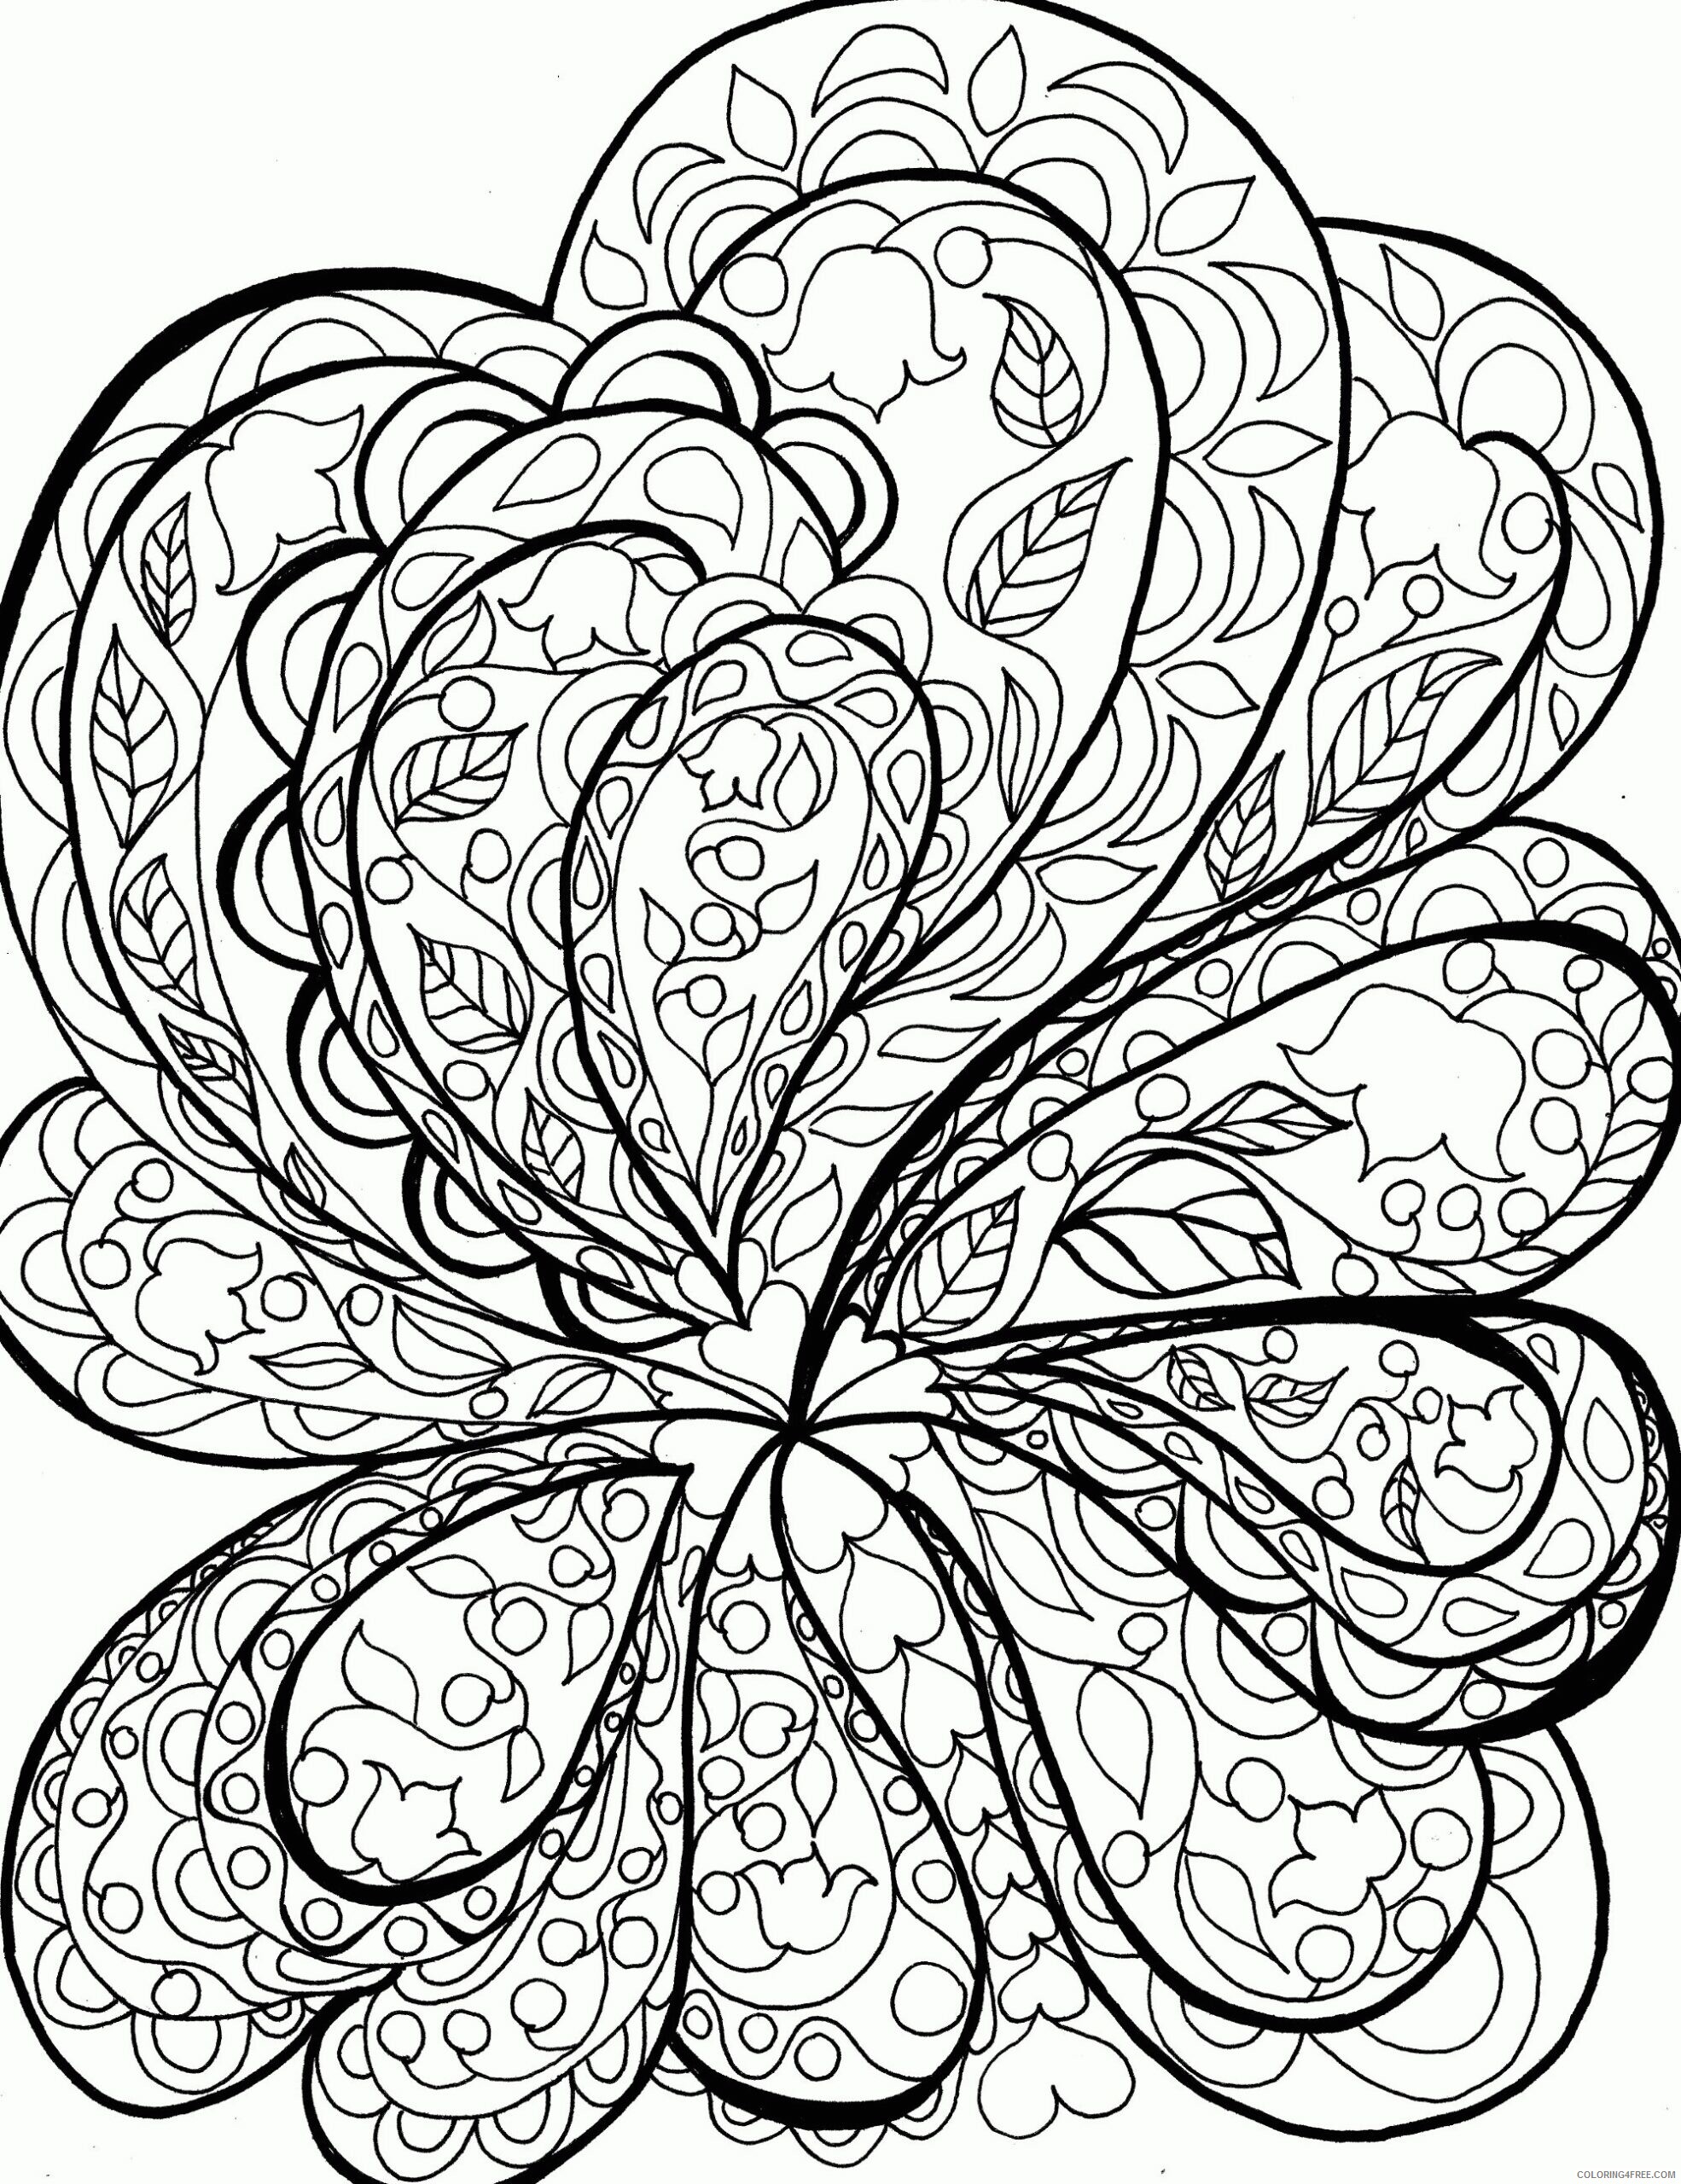 Adult Coloring Pages of The Sun Printable Sheets Happy Family Art original and 2021 a 2044 Coloring4free